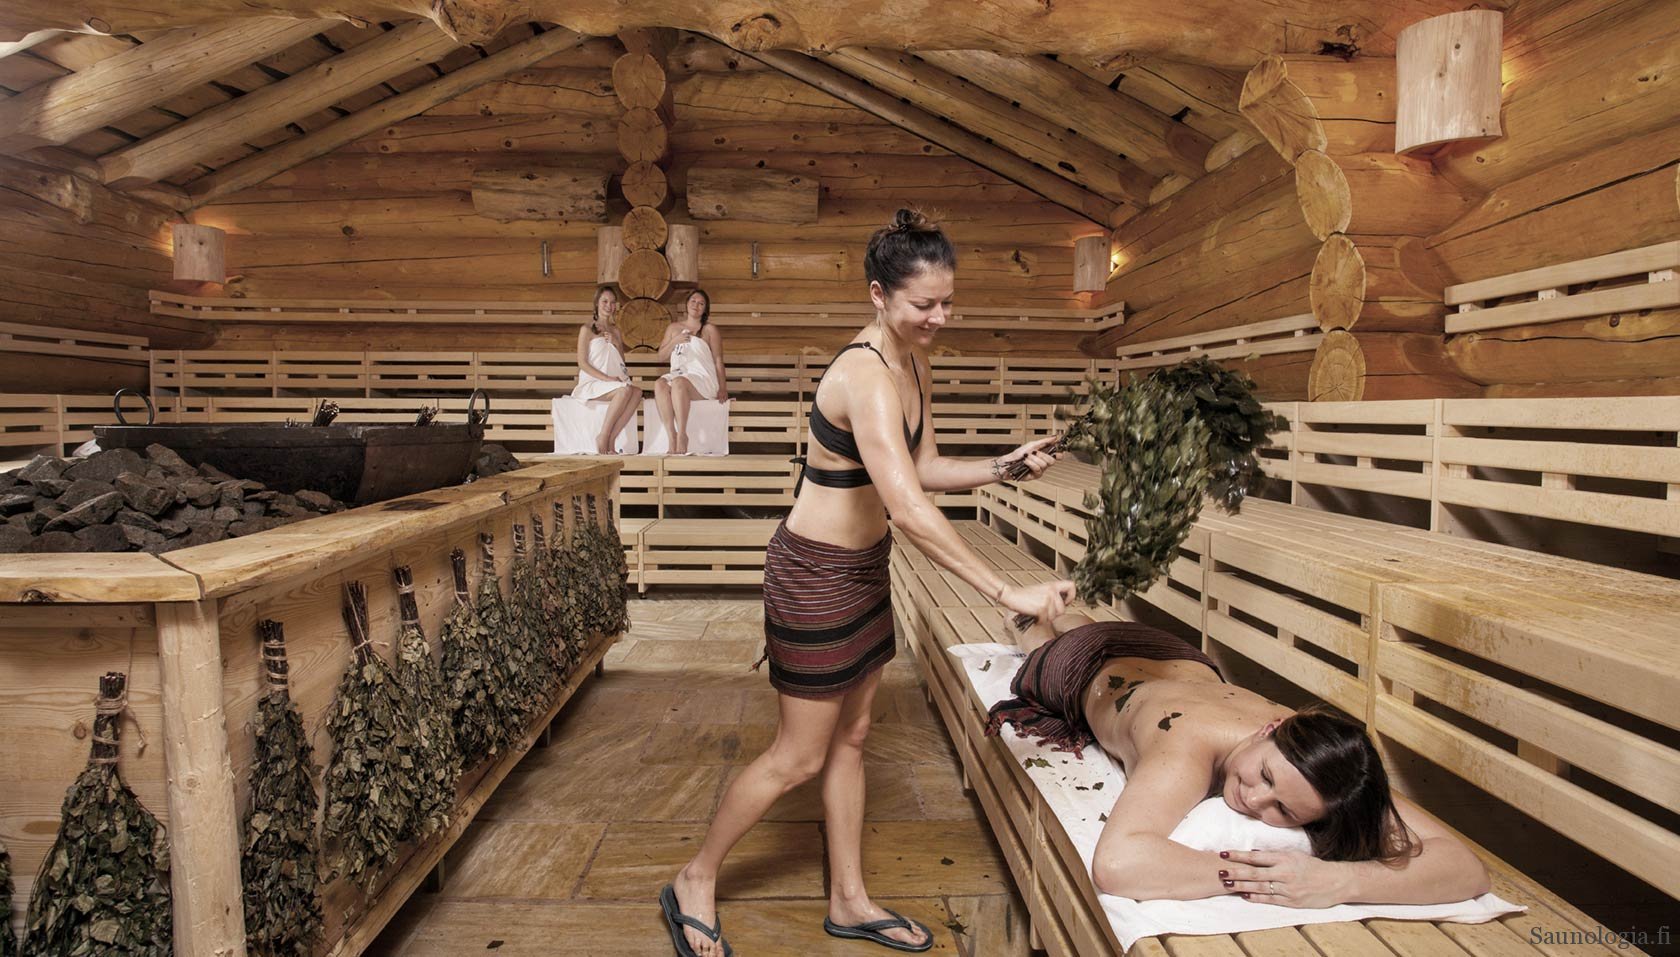 The world’s largest sauna center at Therme Erding